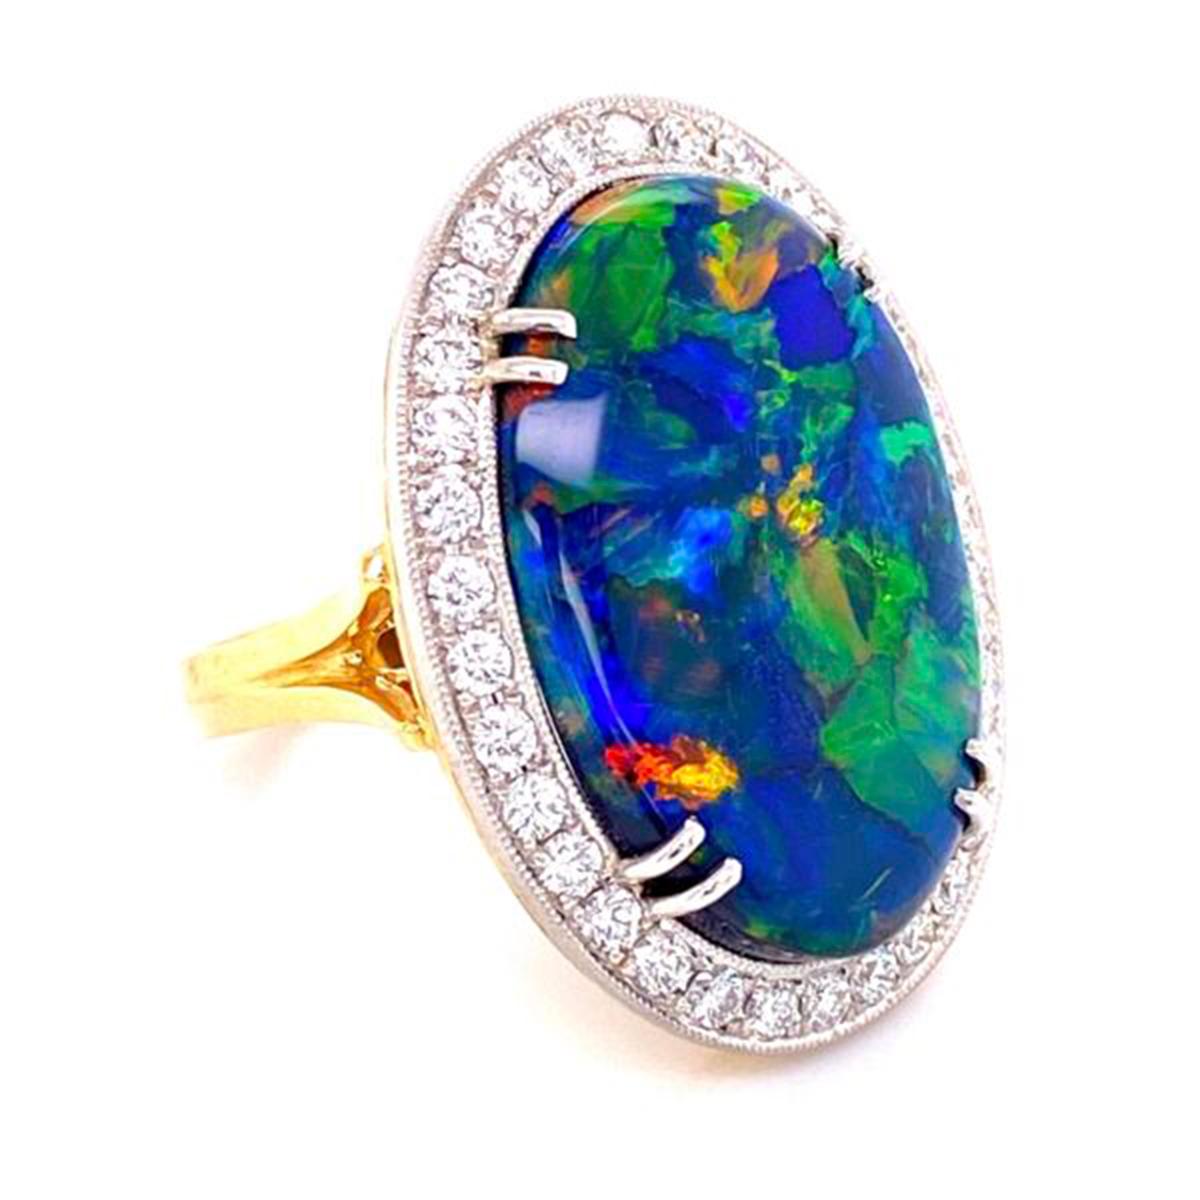 Simply Beautiful! Elegant and finely detailed Solitaire Cocktail Engagement Ring, set with a securely nestled 10.68 Carat Black Opal surrounded by Brilliant-cut Diamonds, weighing approx. 0.82 total Carat weight.  Hand crafted in Platinum on 18